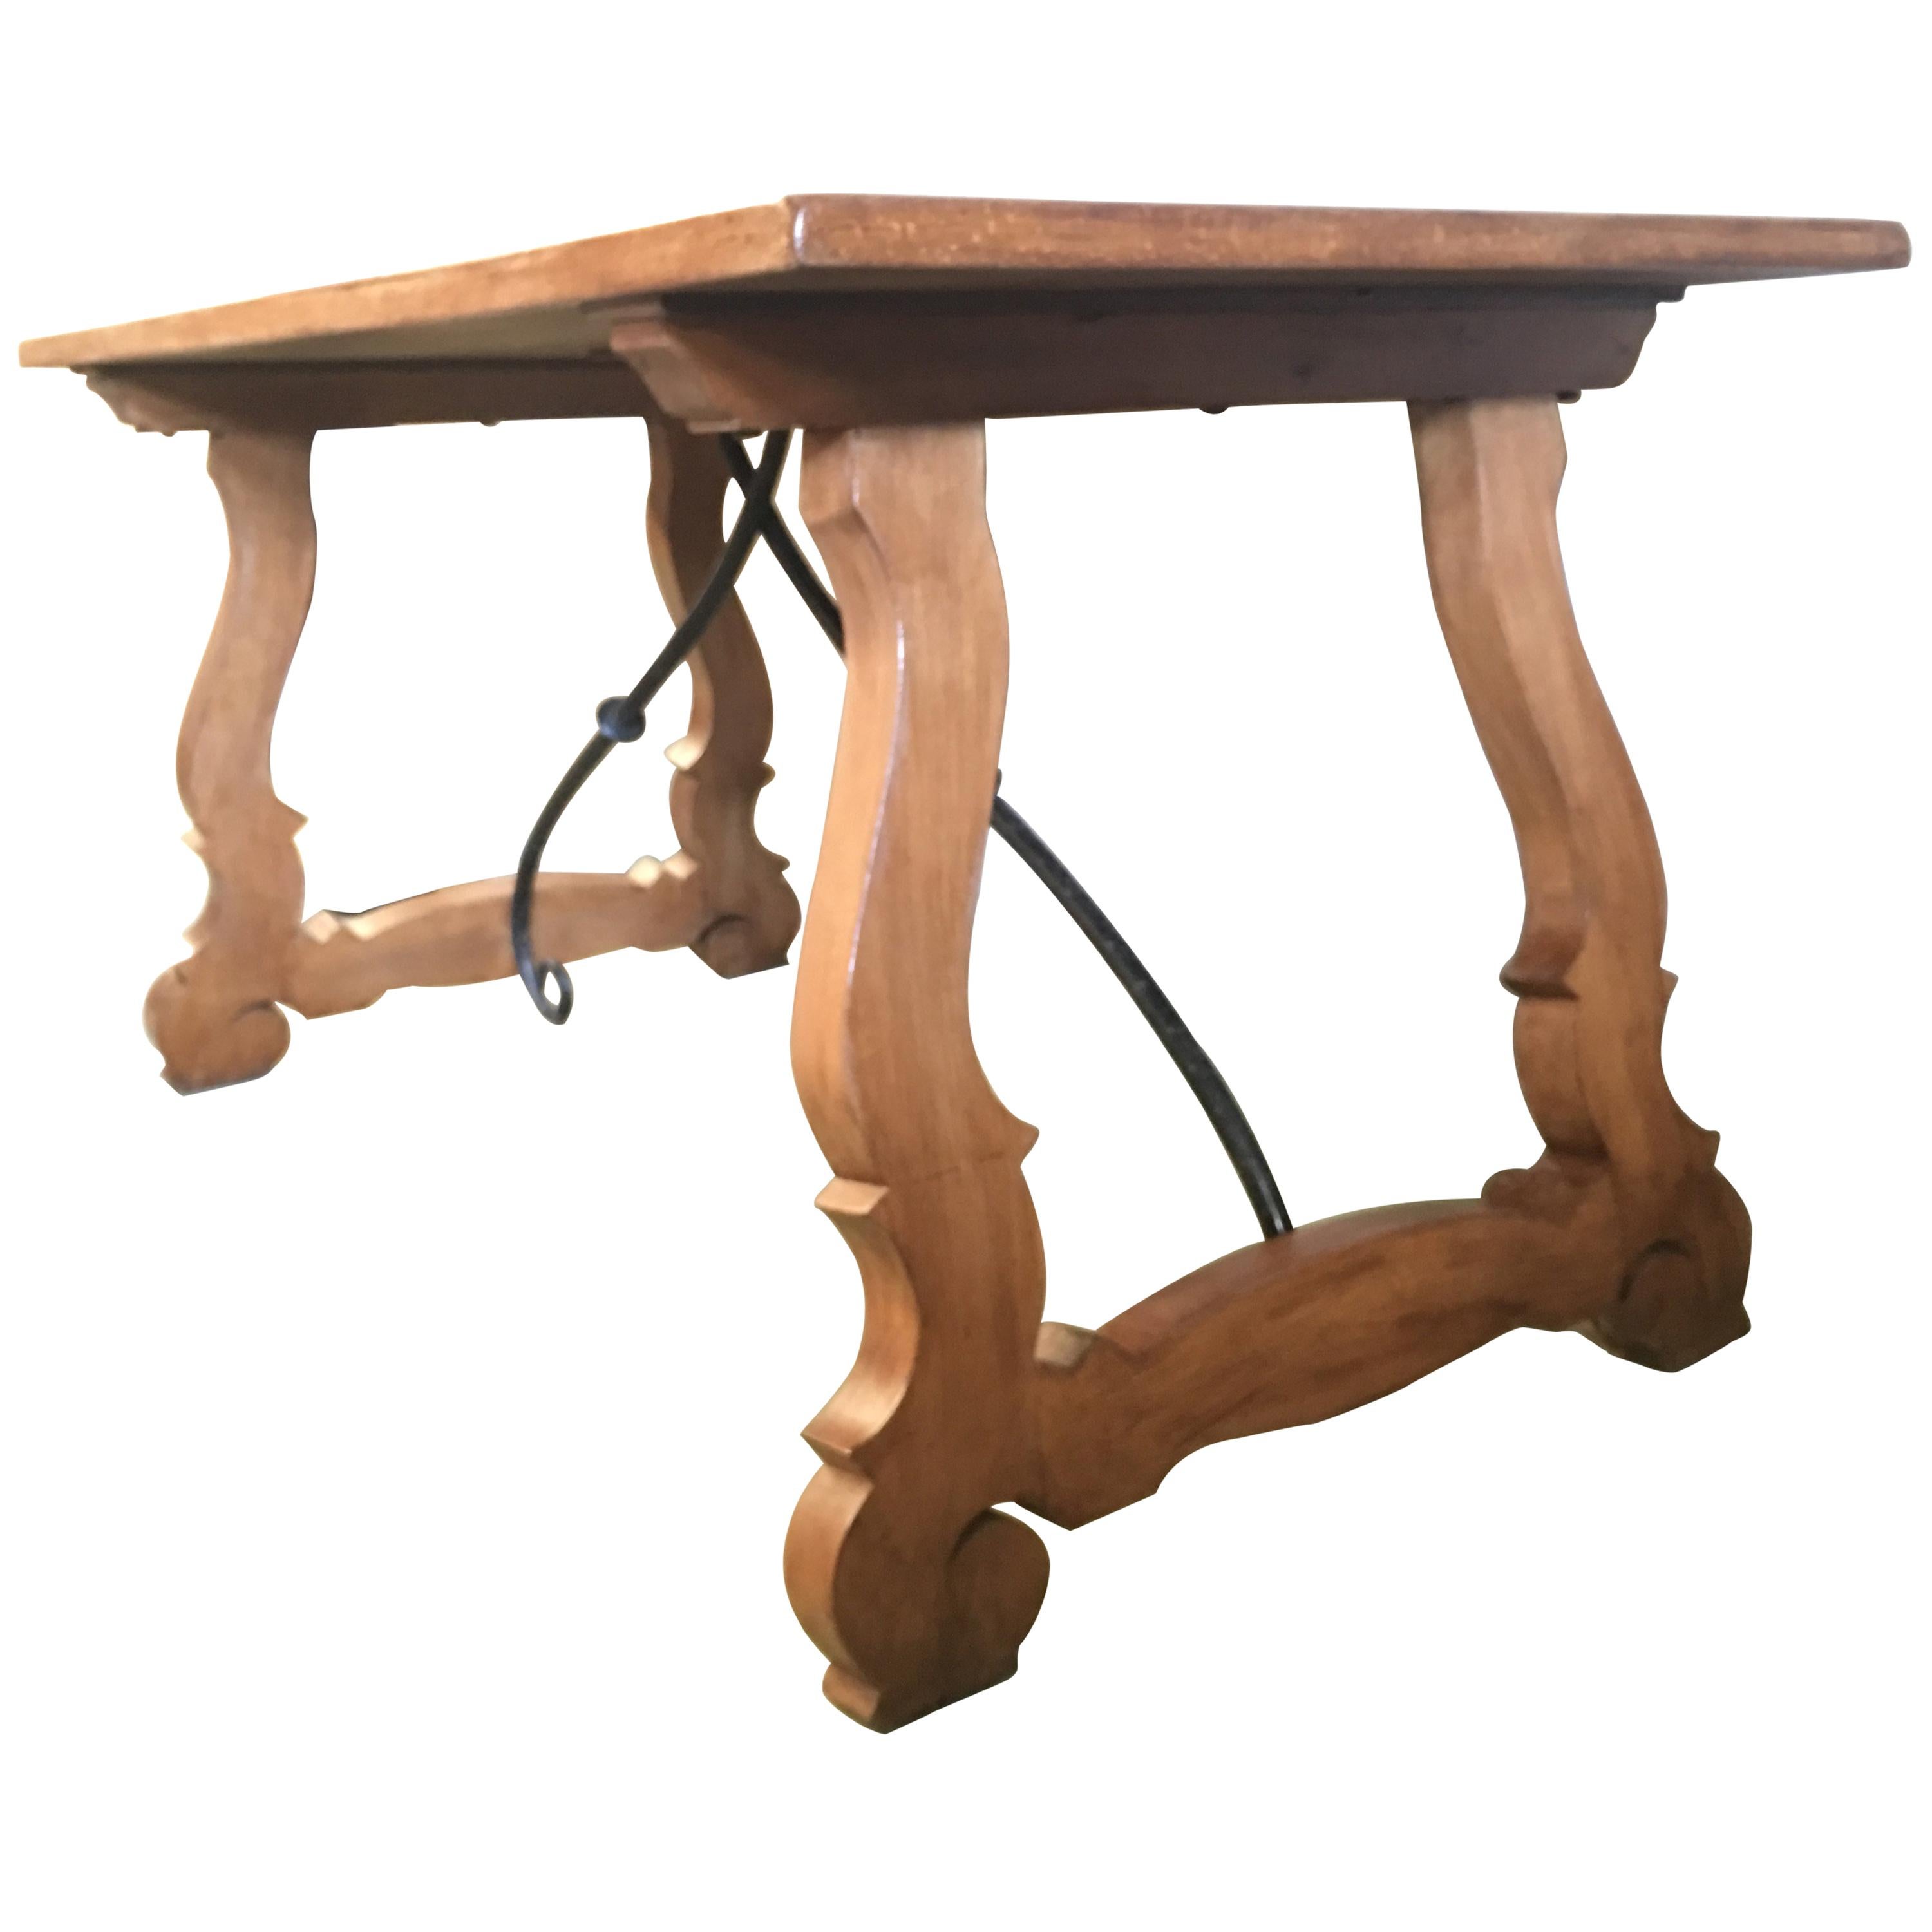 Early 20th Century Spanish Walnut Trestle Table and Forged Iron Stretcher, Desk